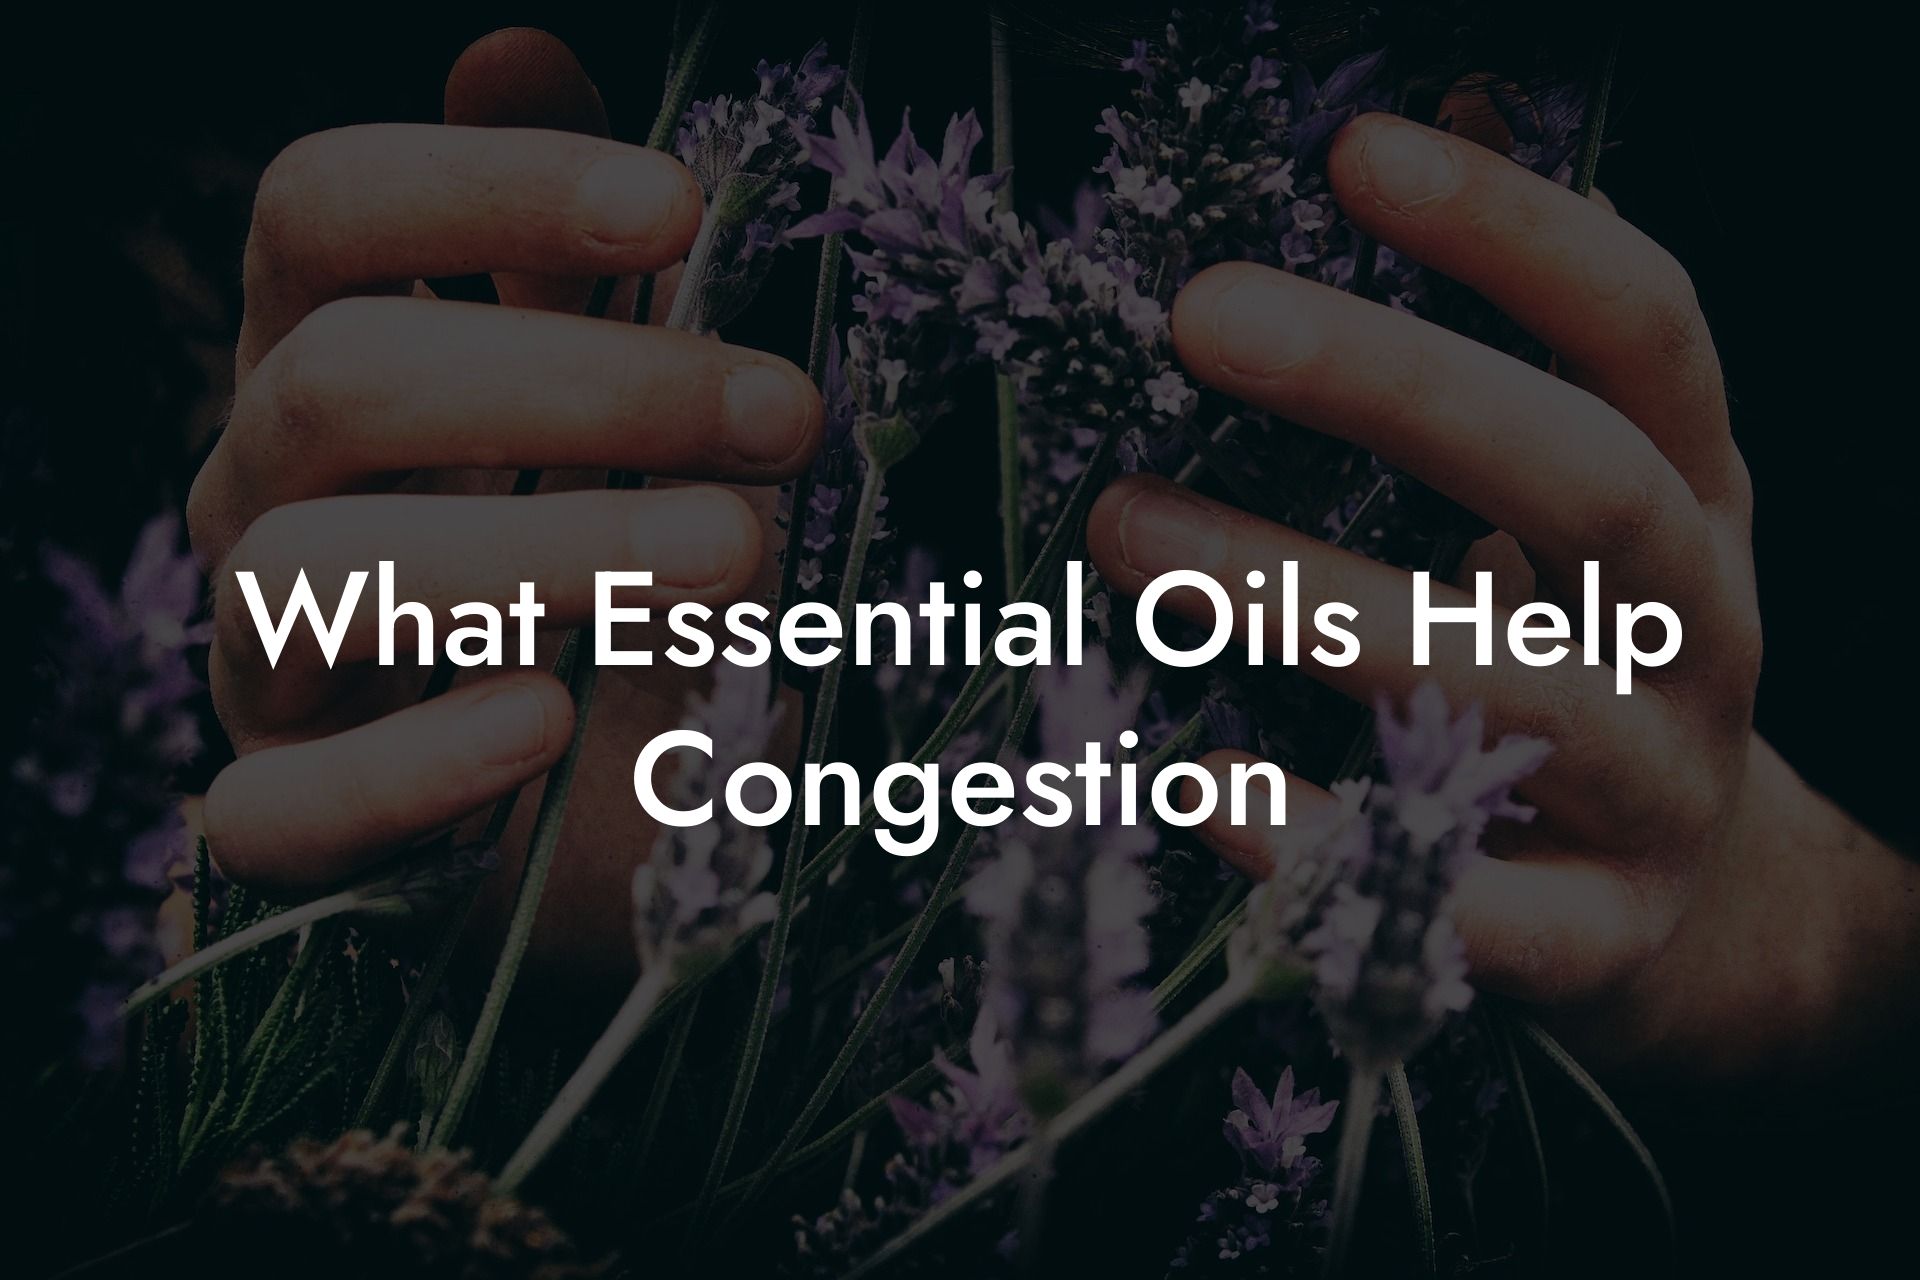 What Essential Oils Help Congestion